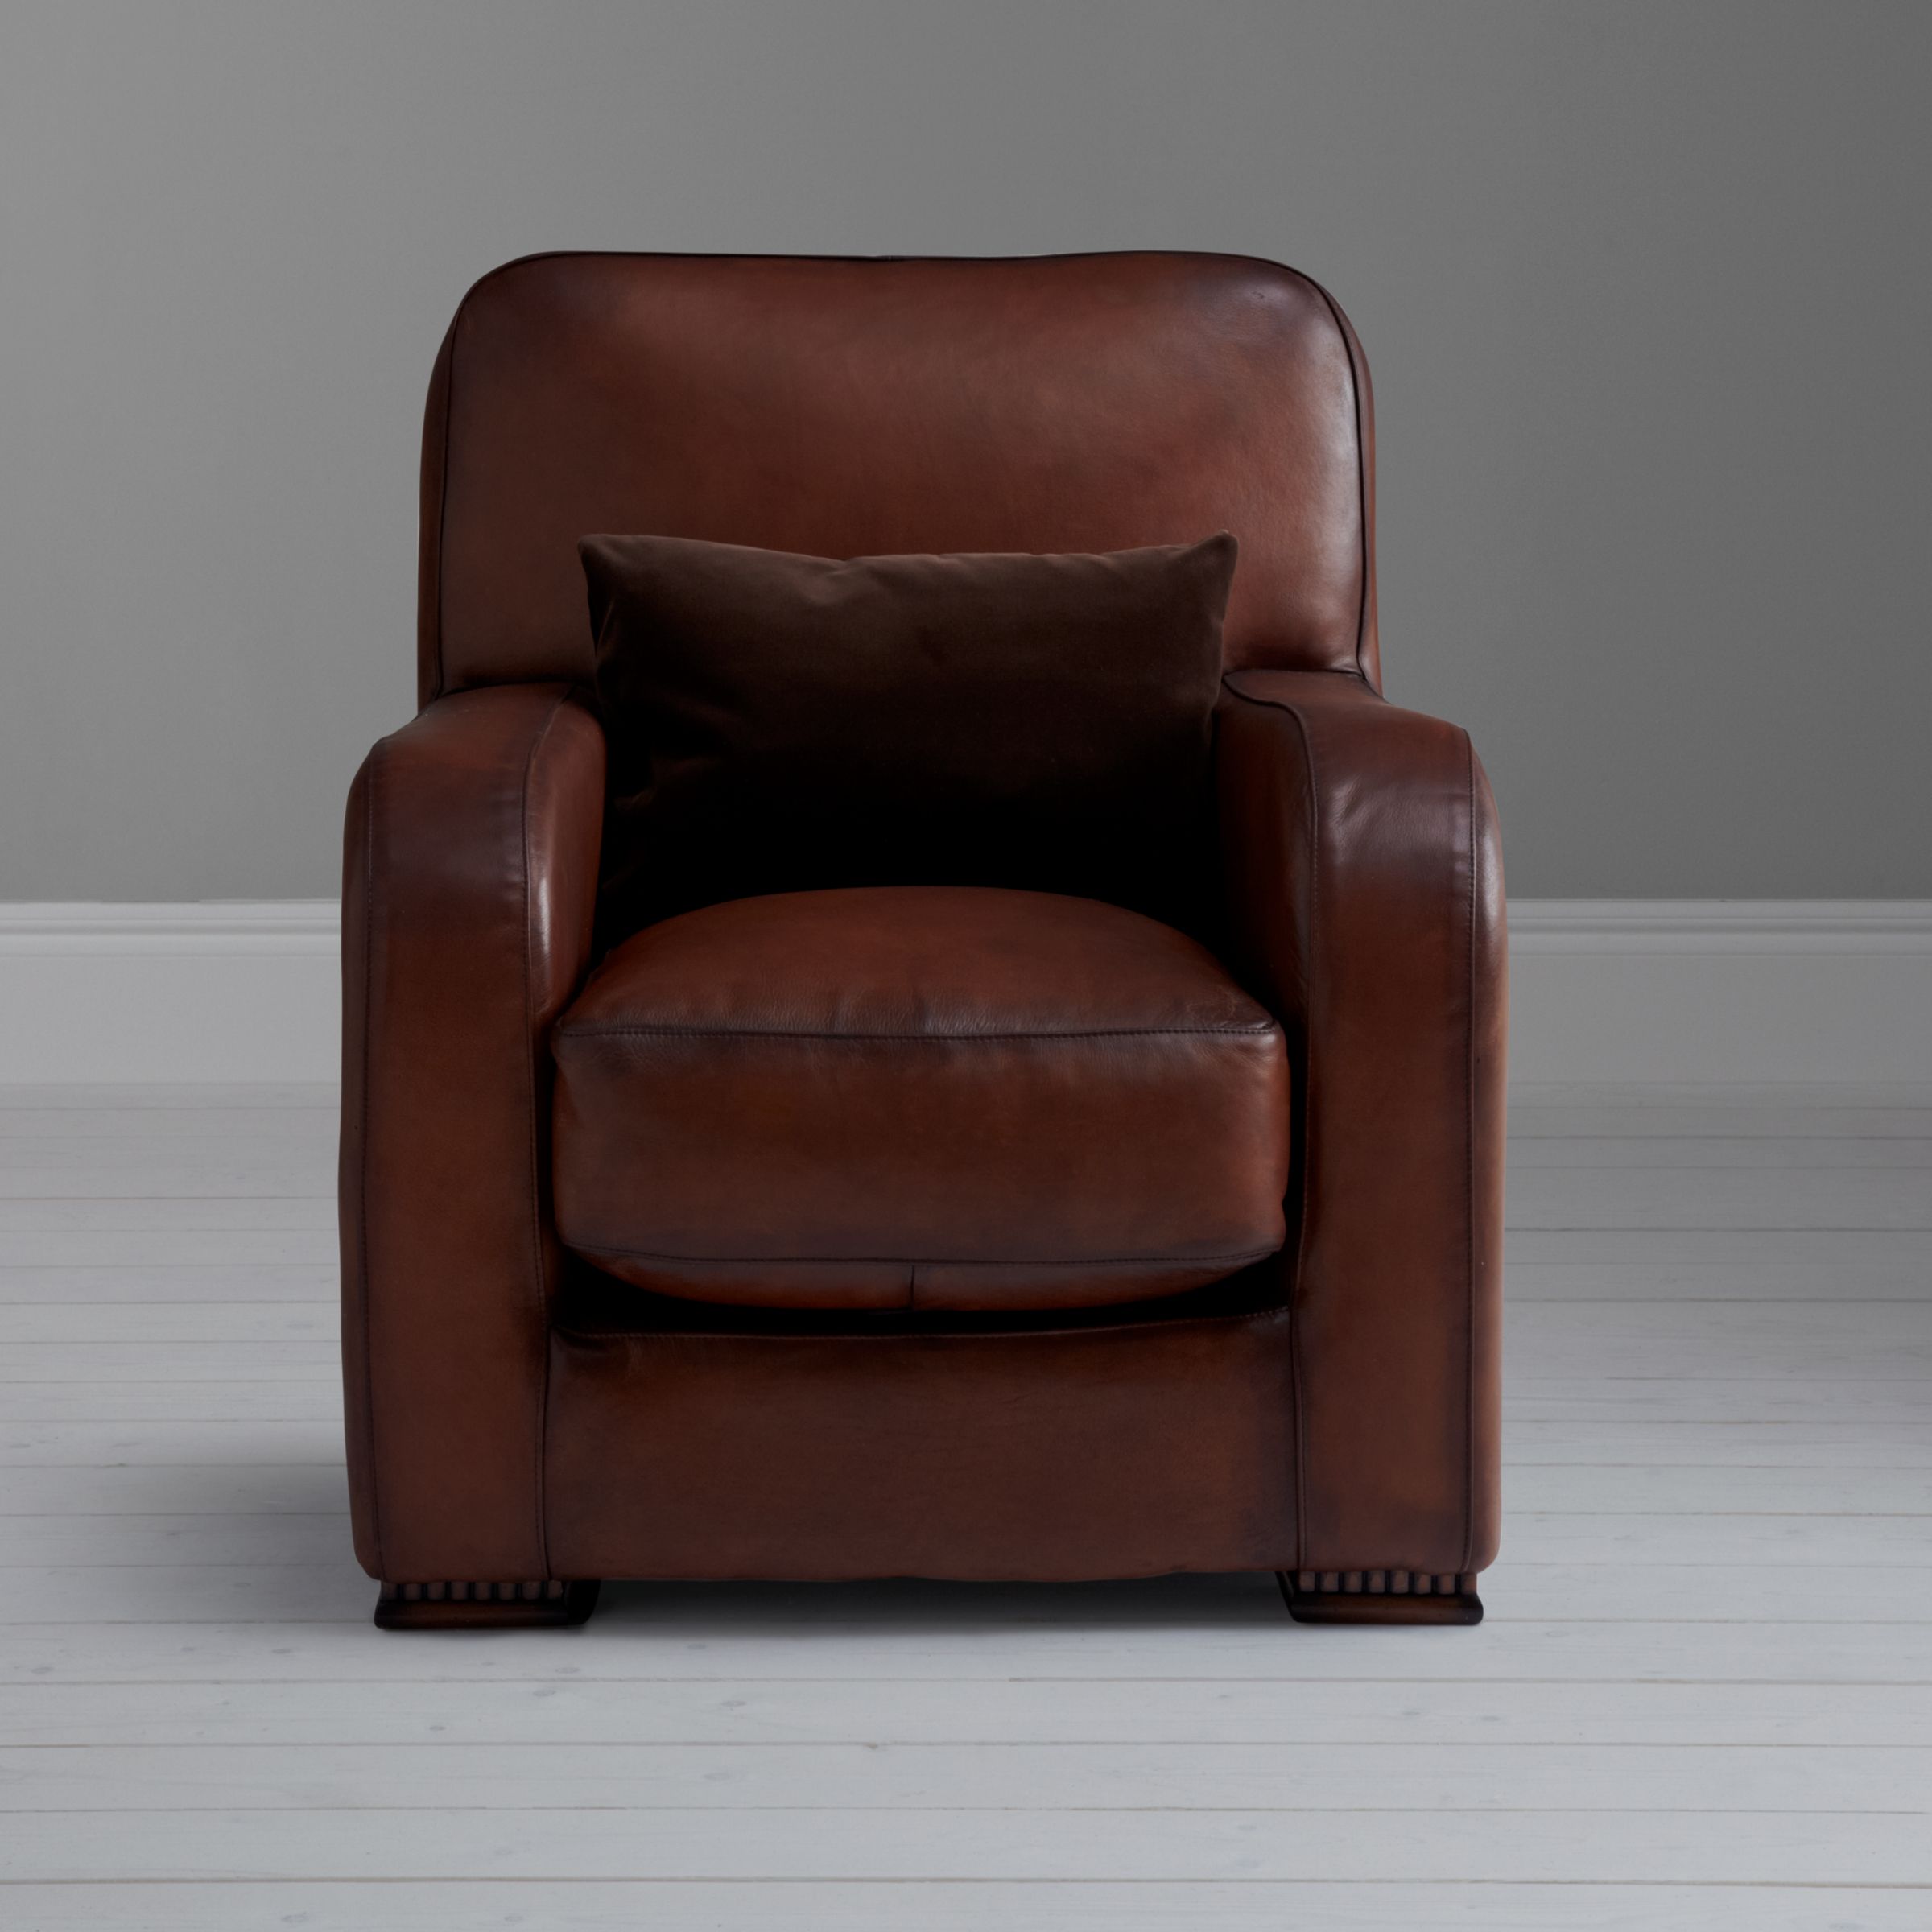 Tetrad Totnes Leather Chair at John Lewis